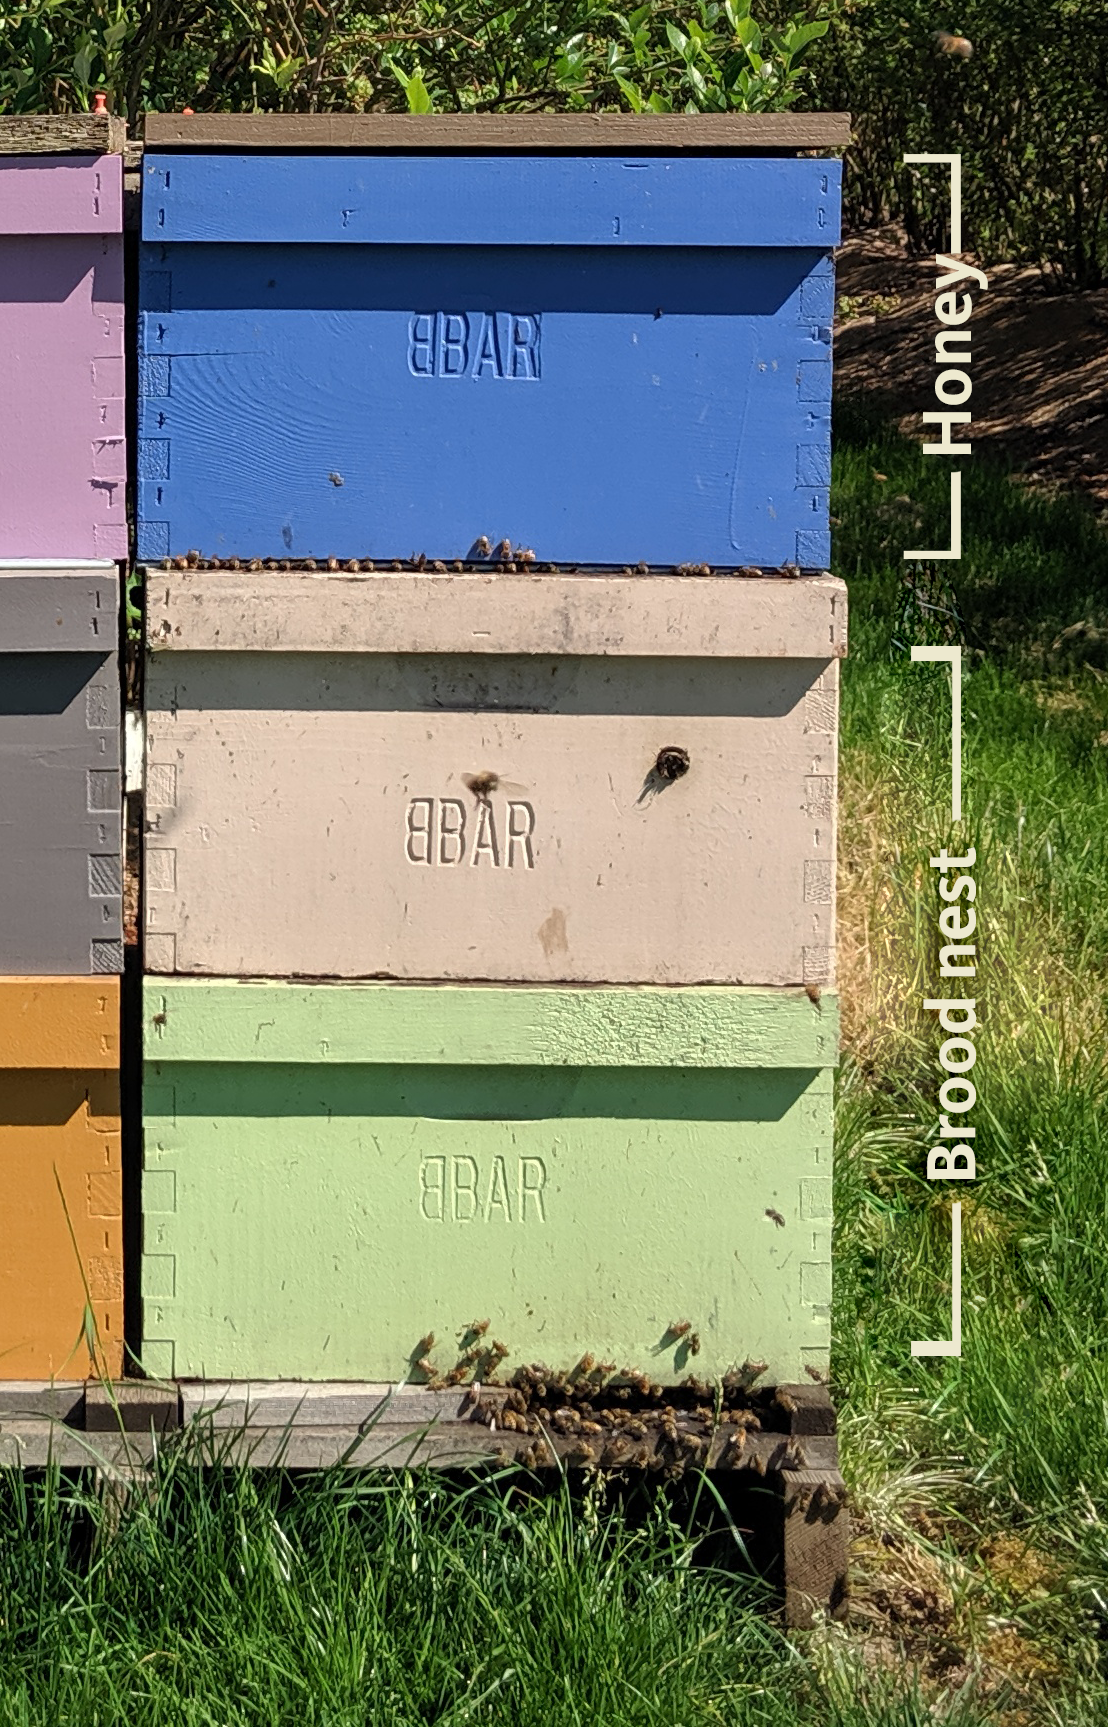 Three bee colony boxes of different colors -- green, beige and blue -- are shown stacked on top of each.